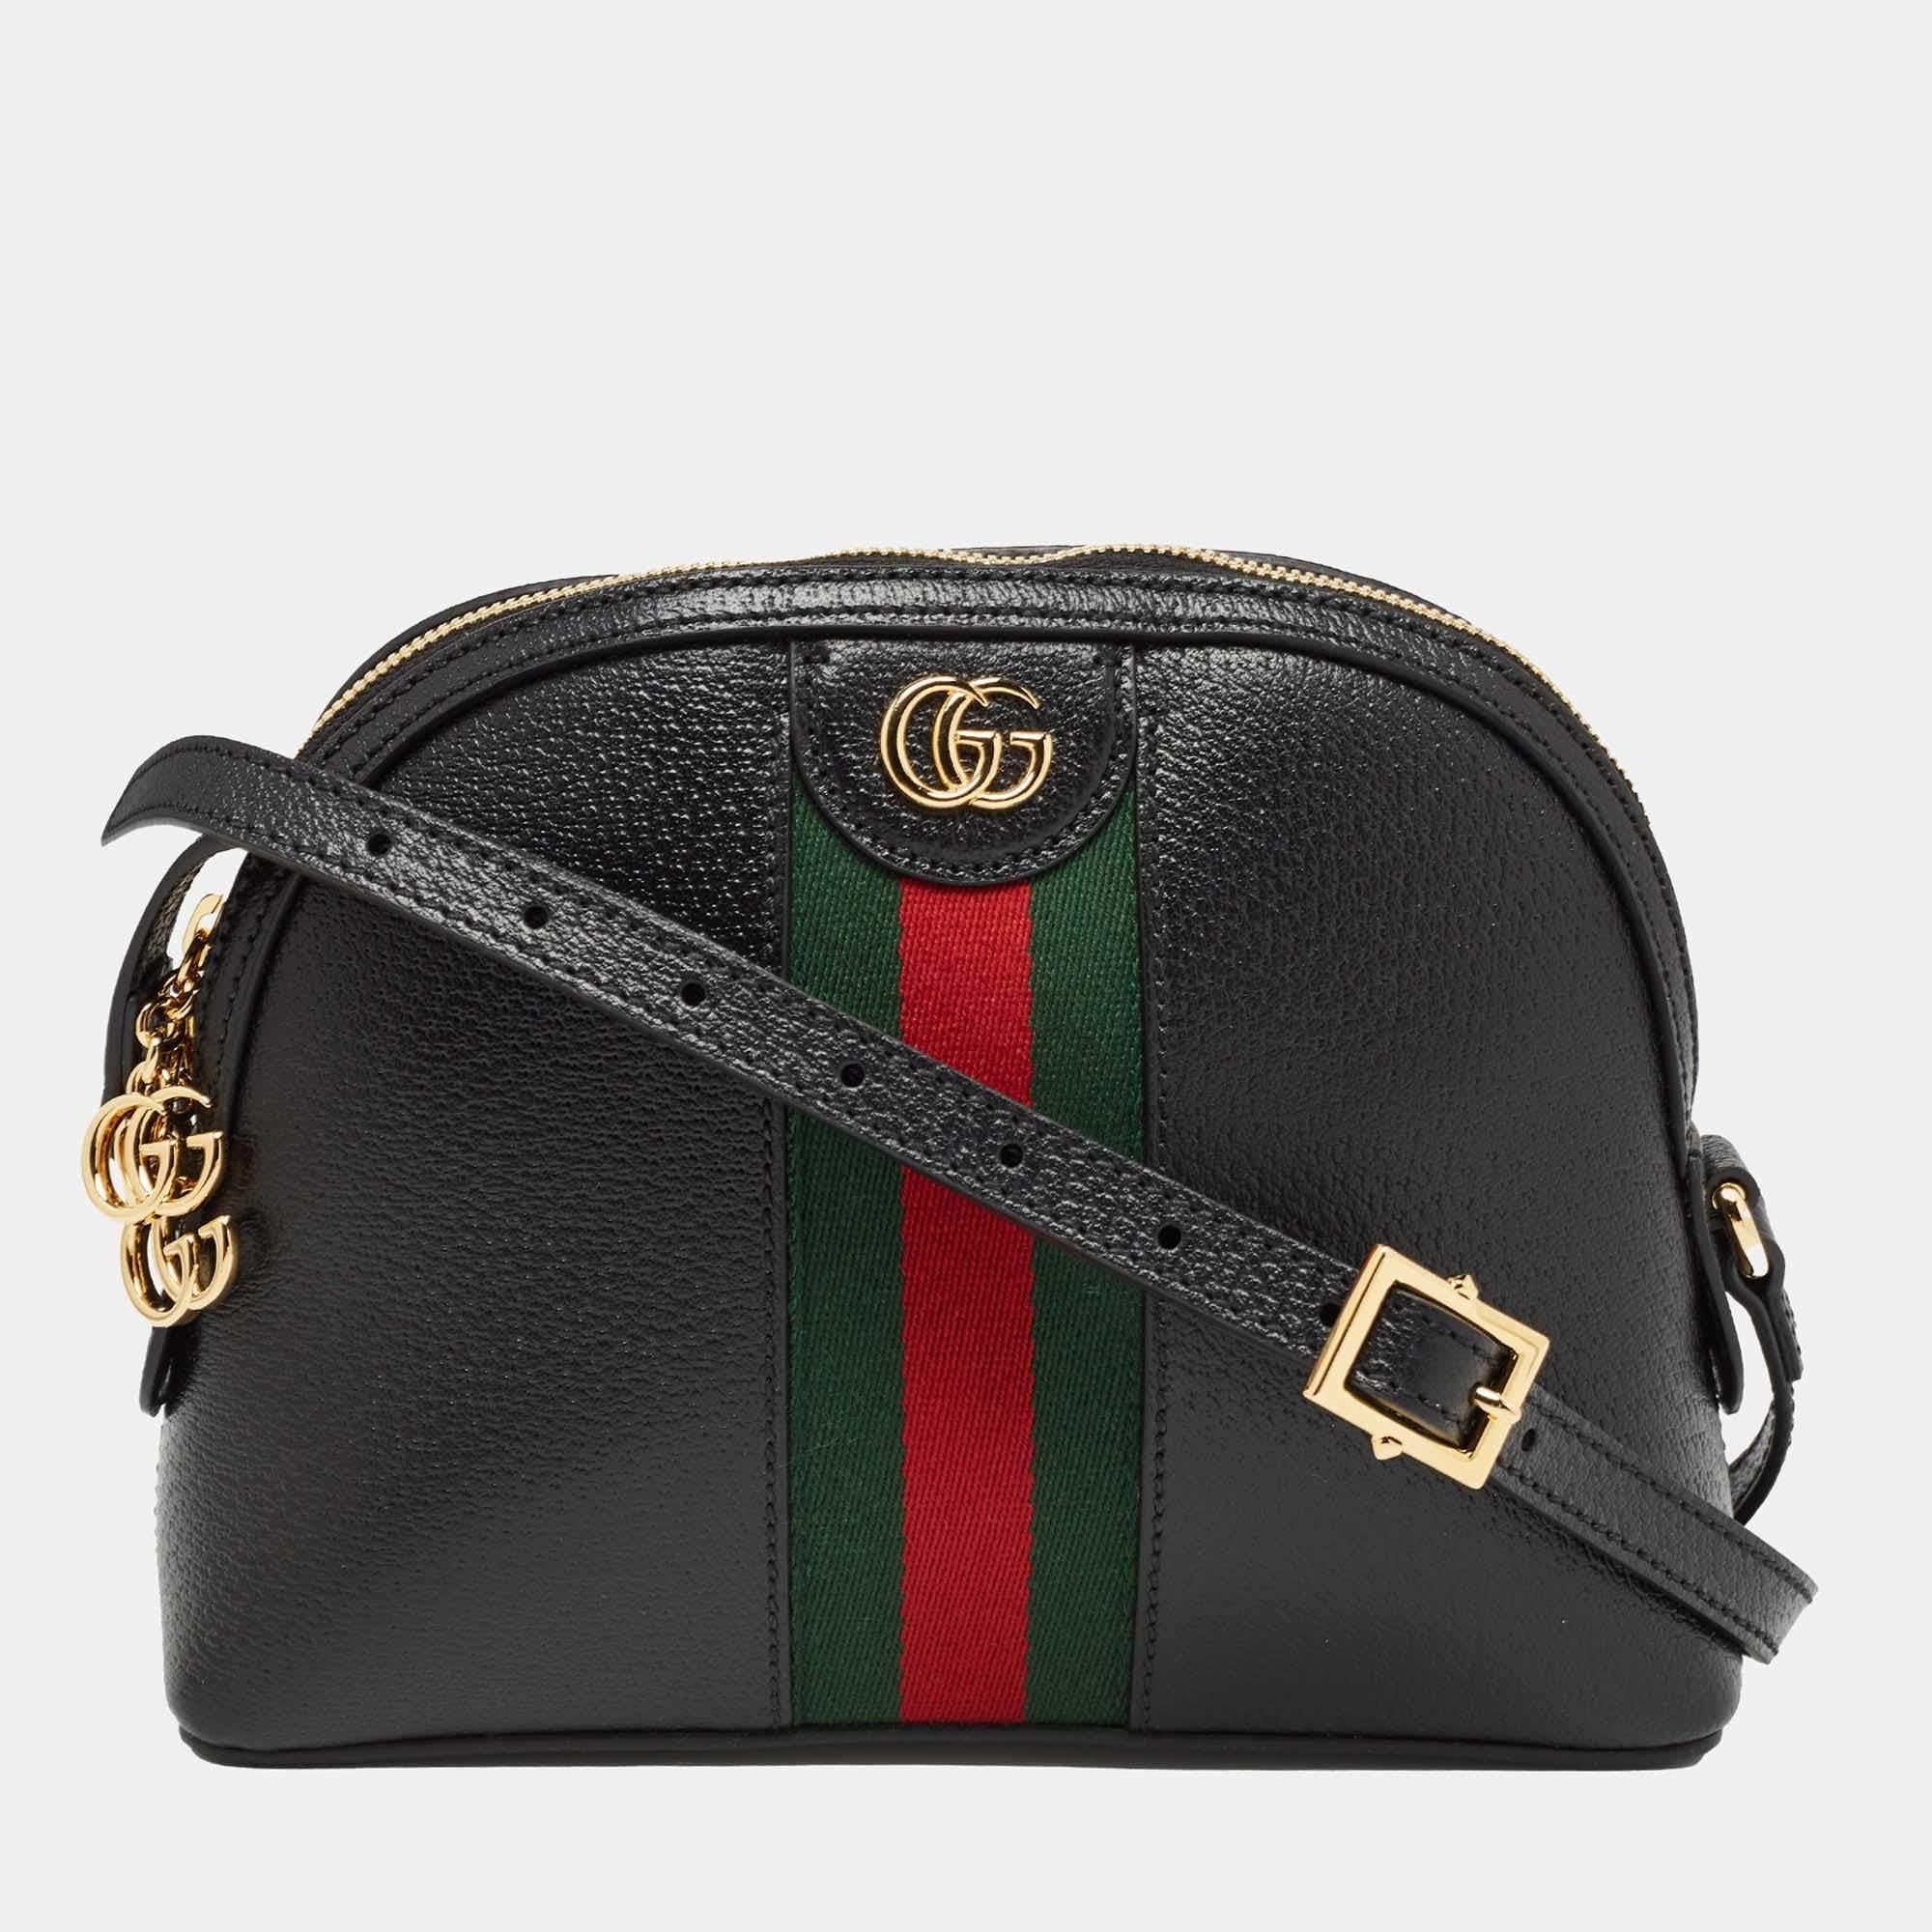 Gucci Black Leather Small Web Ophidia GG Shoulder Bag